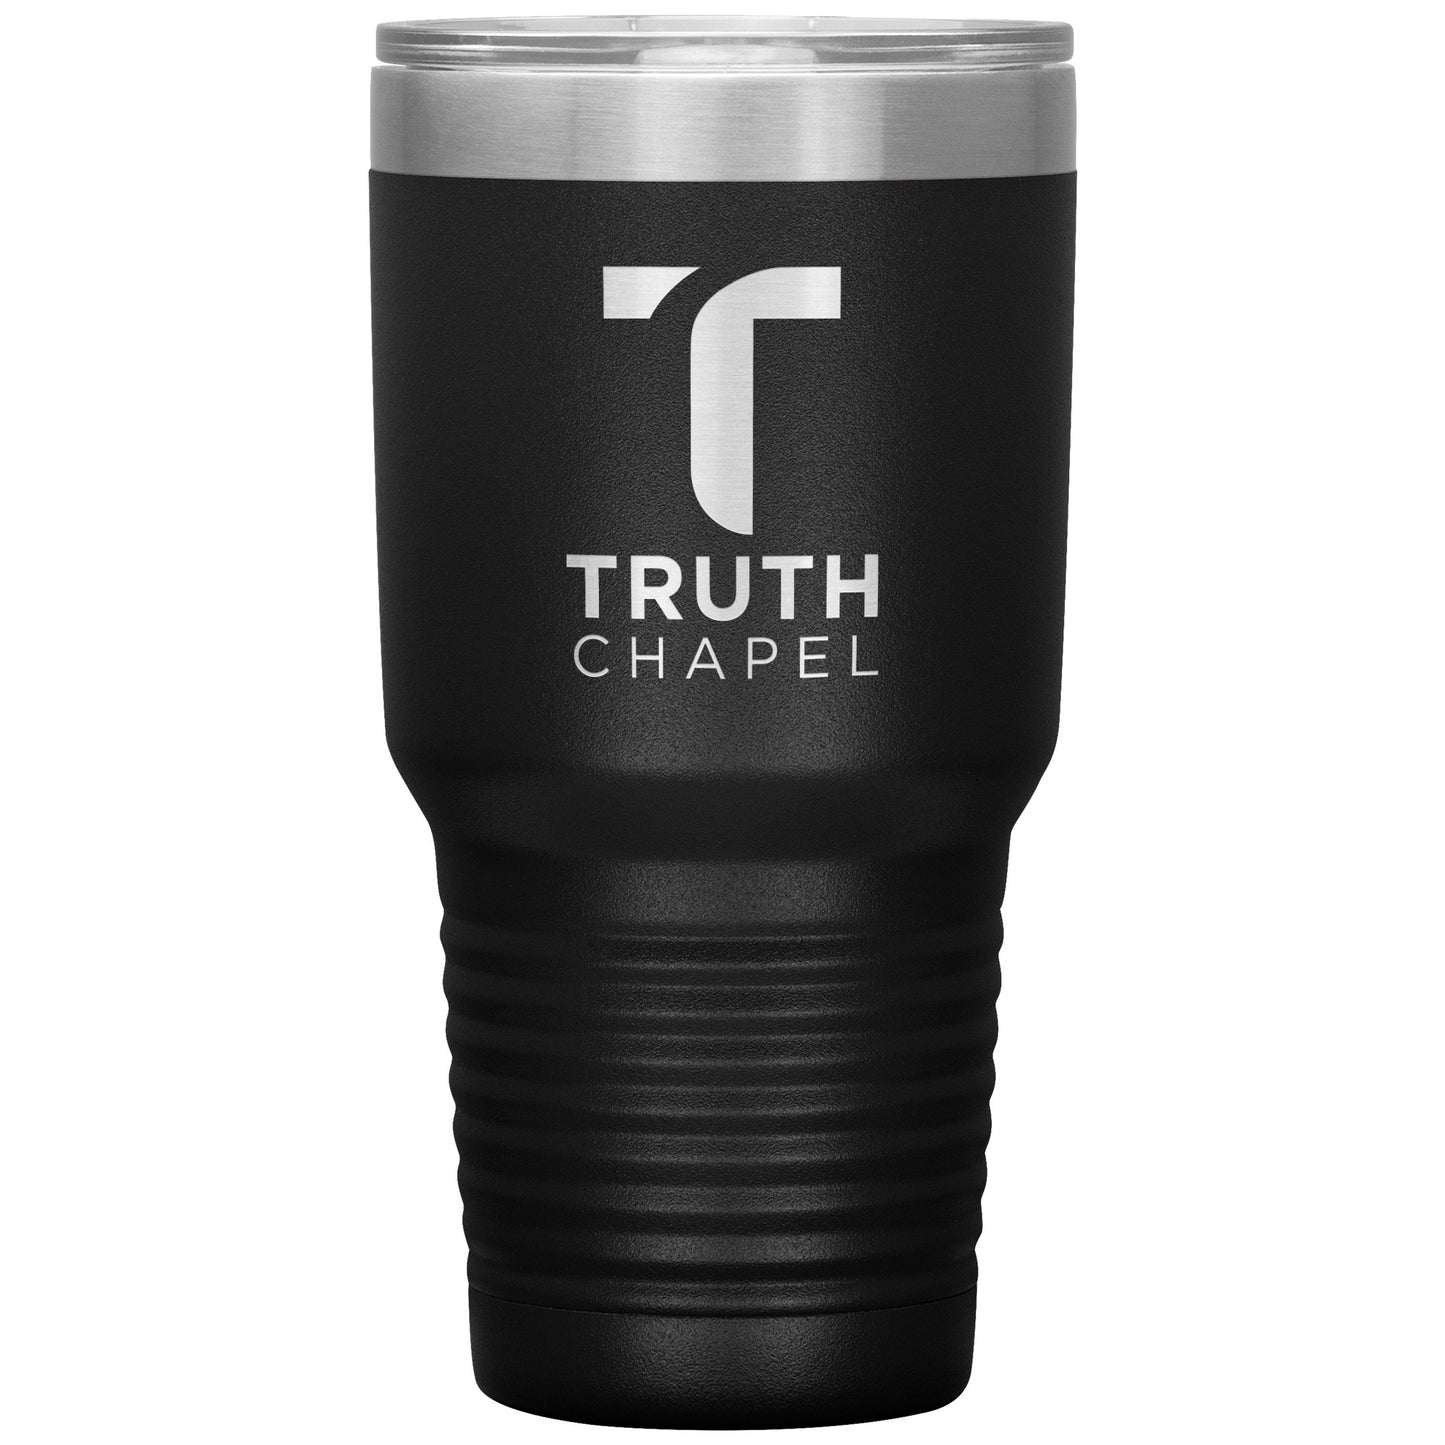 Truth Chapel - Insulated Tumblers